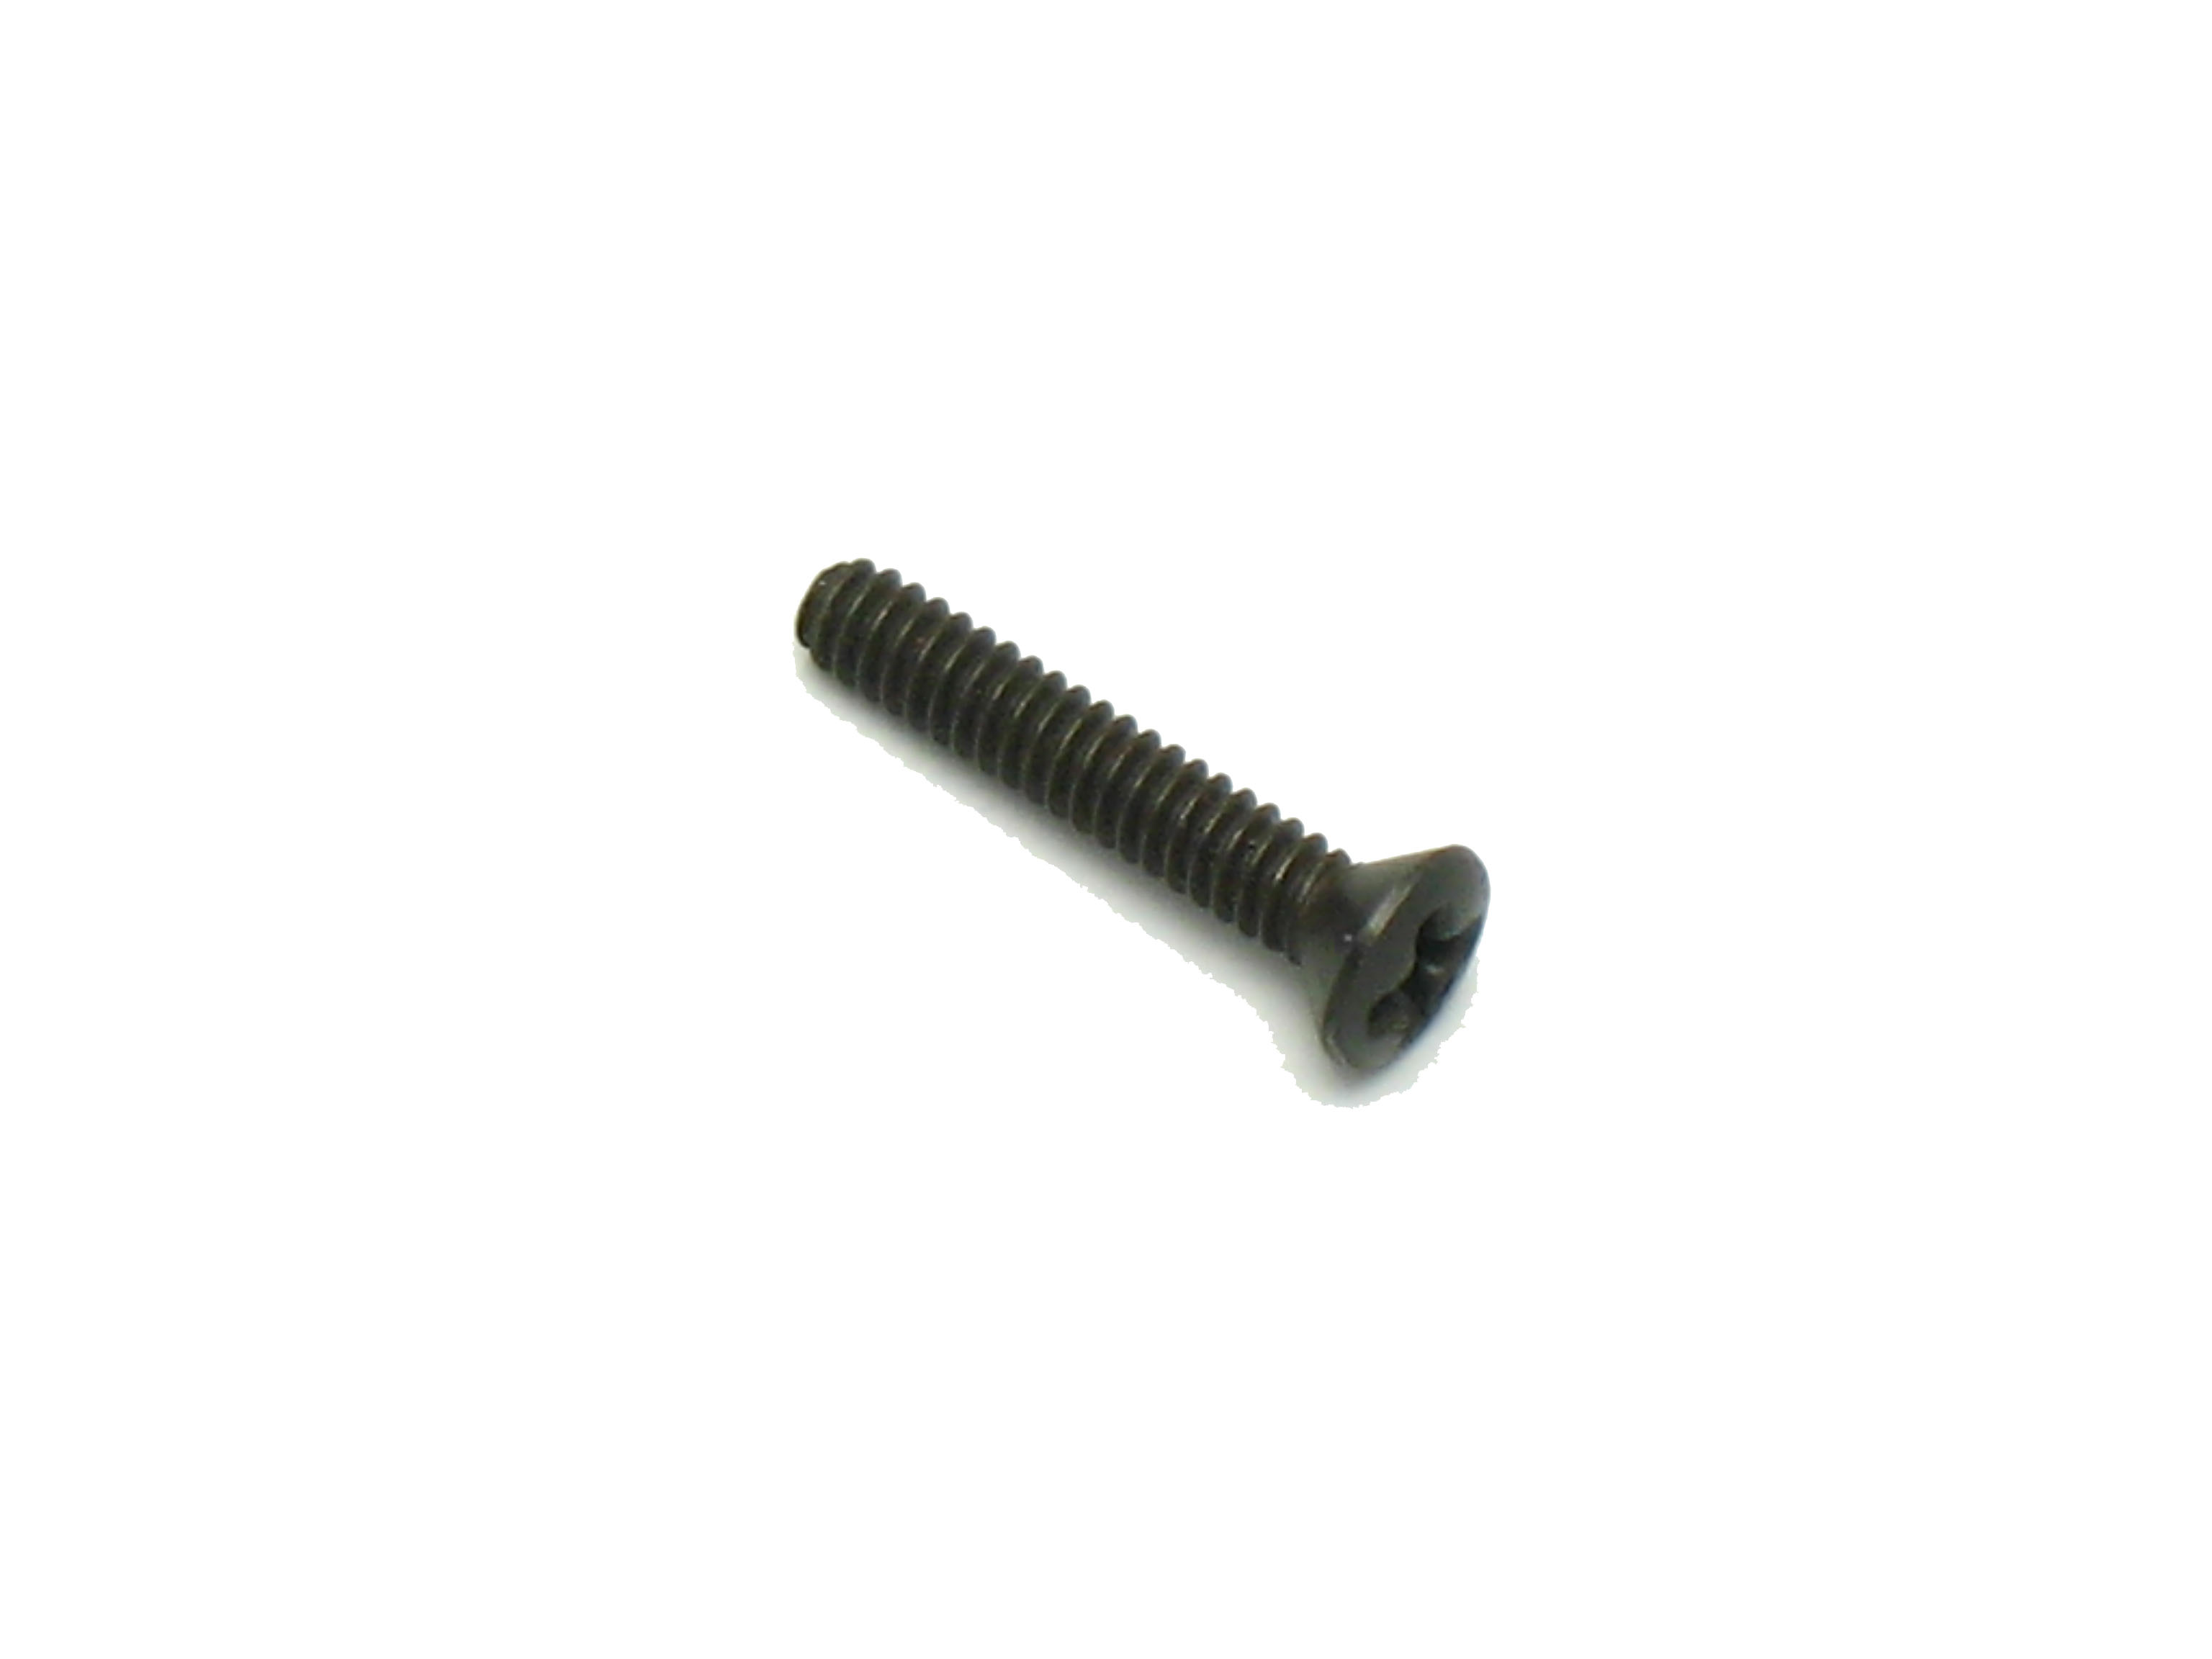 Kahler Cam Cage Mounting Screw PN# 8393